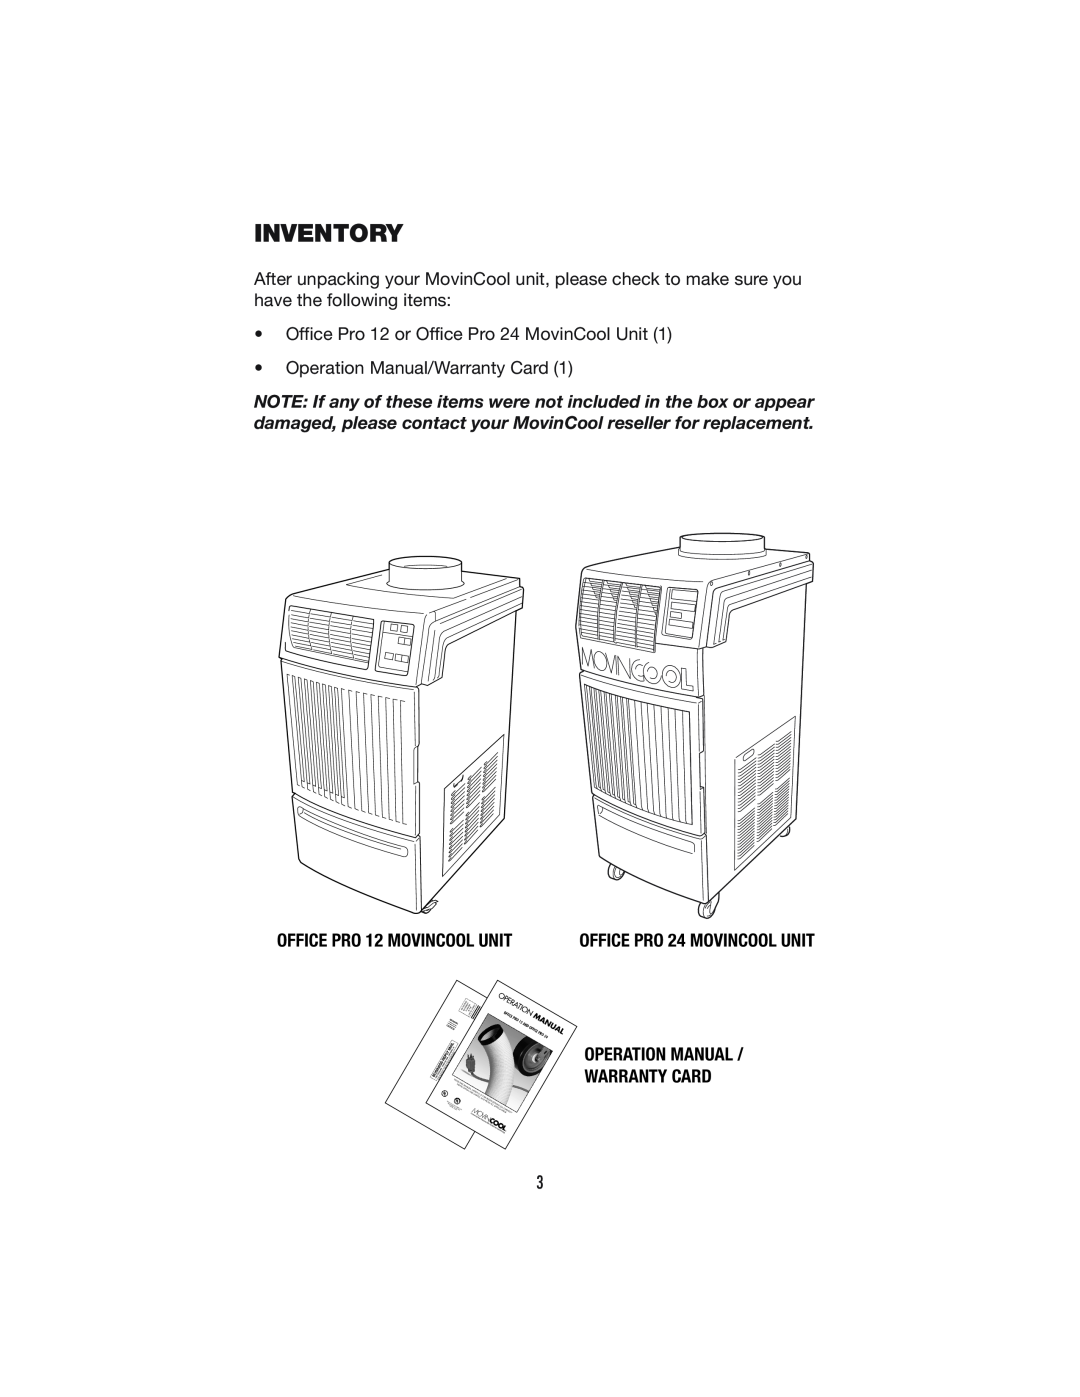 Denso OFFICE PRO 24 operation manual Inventory, OFFICE PRO 12 MOVINCOOL UNIT 